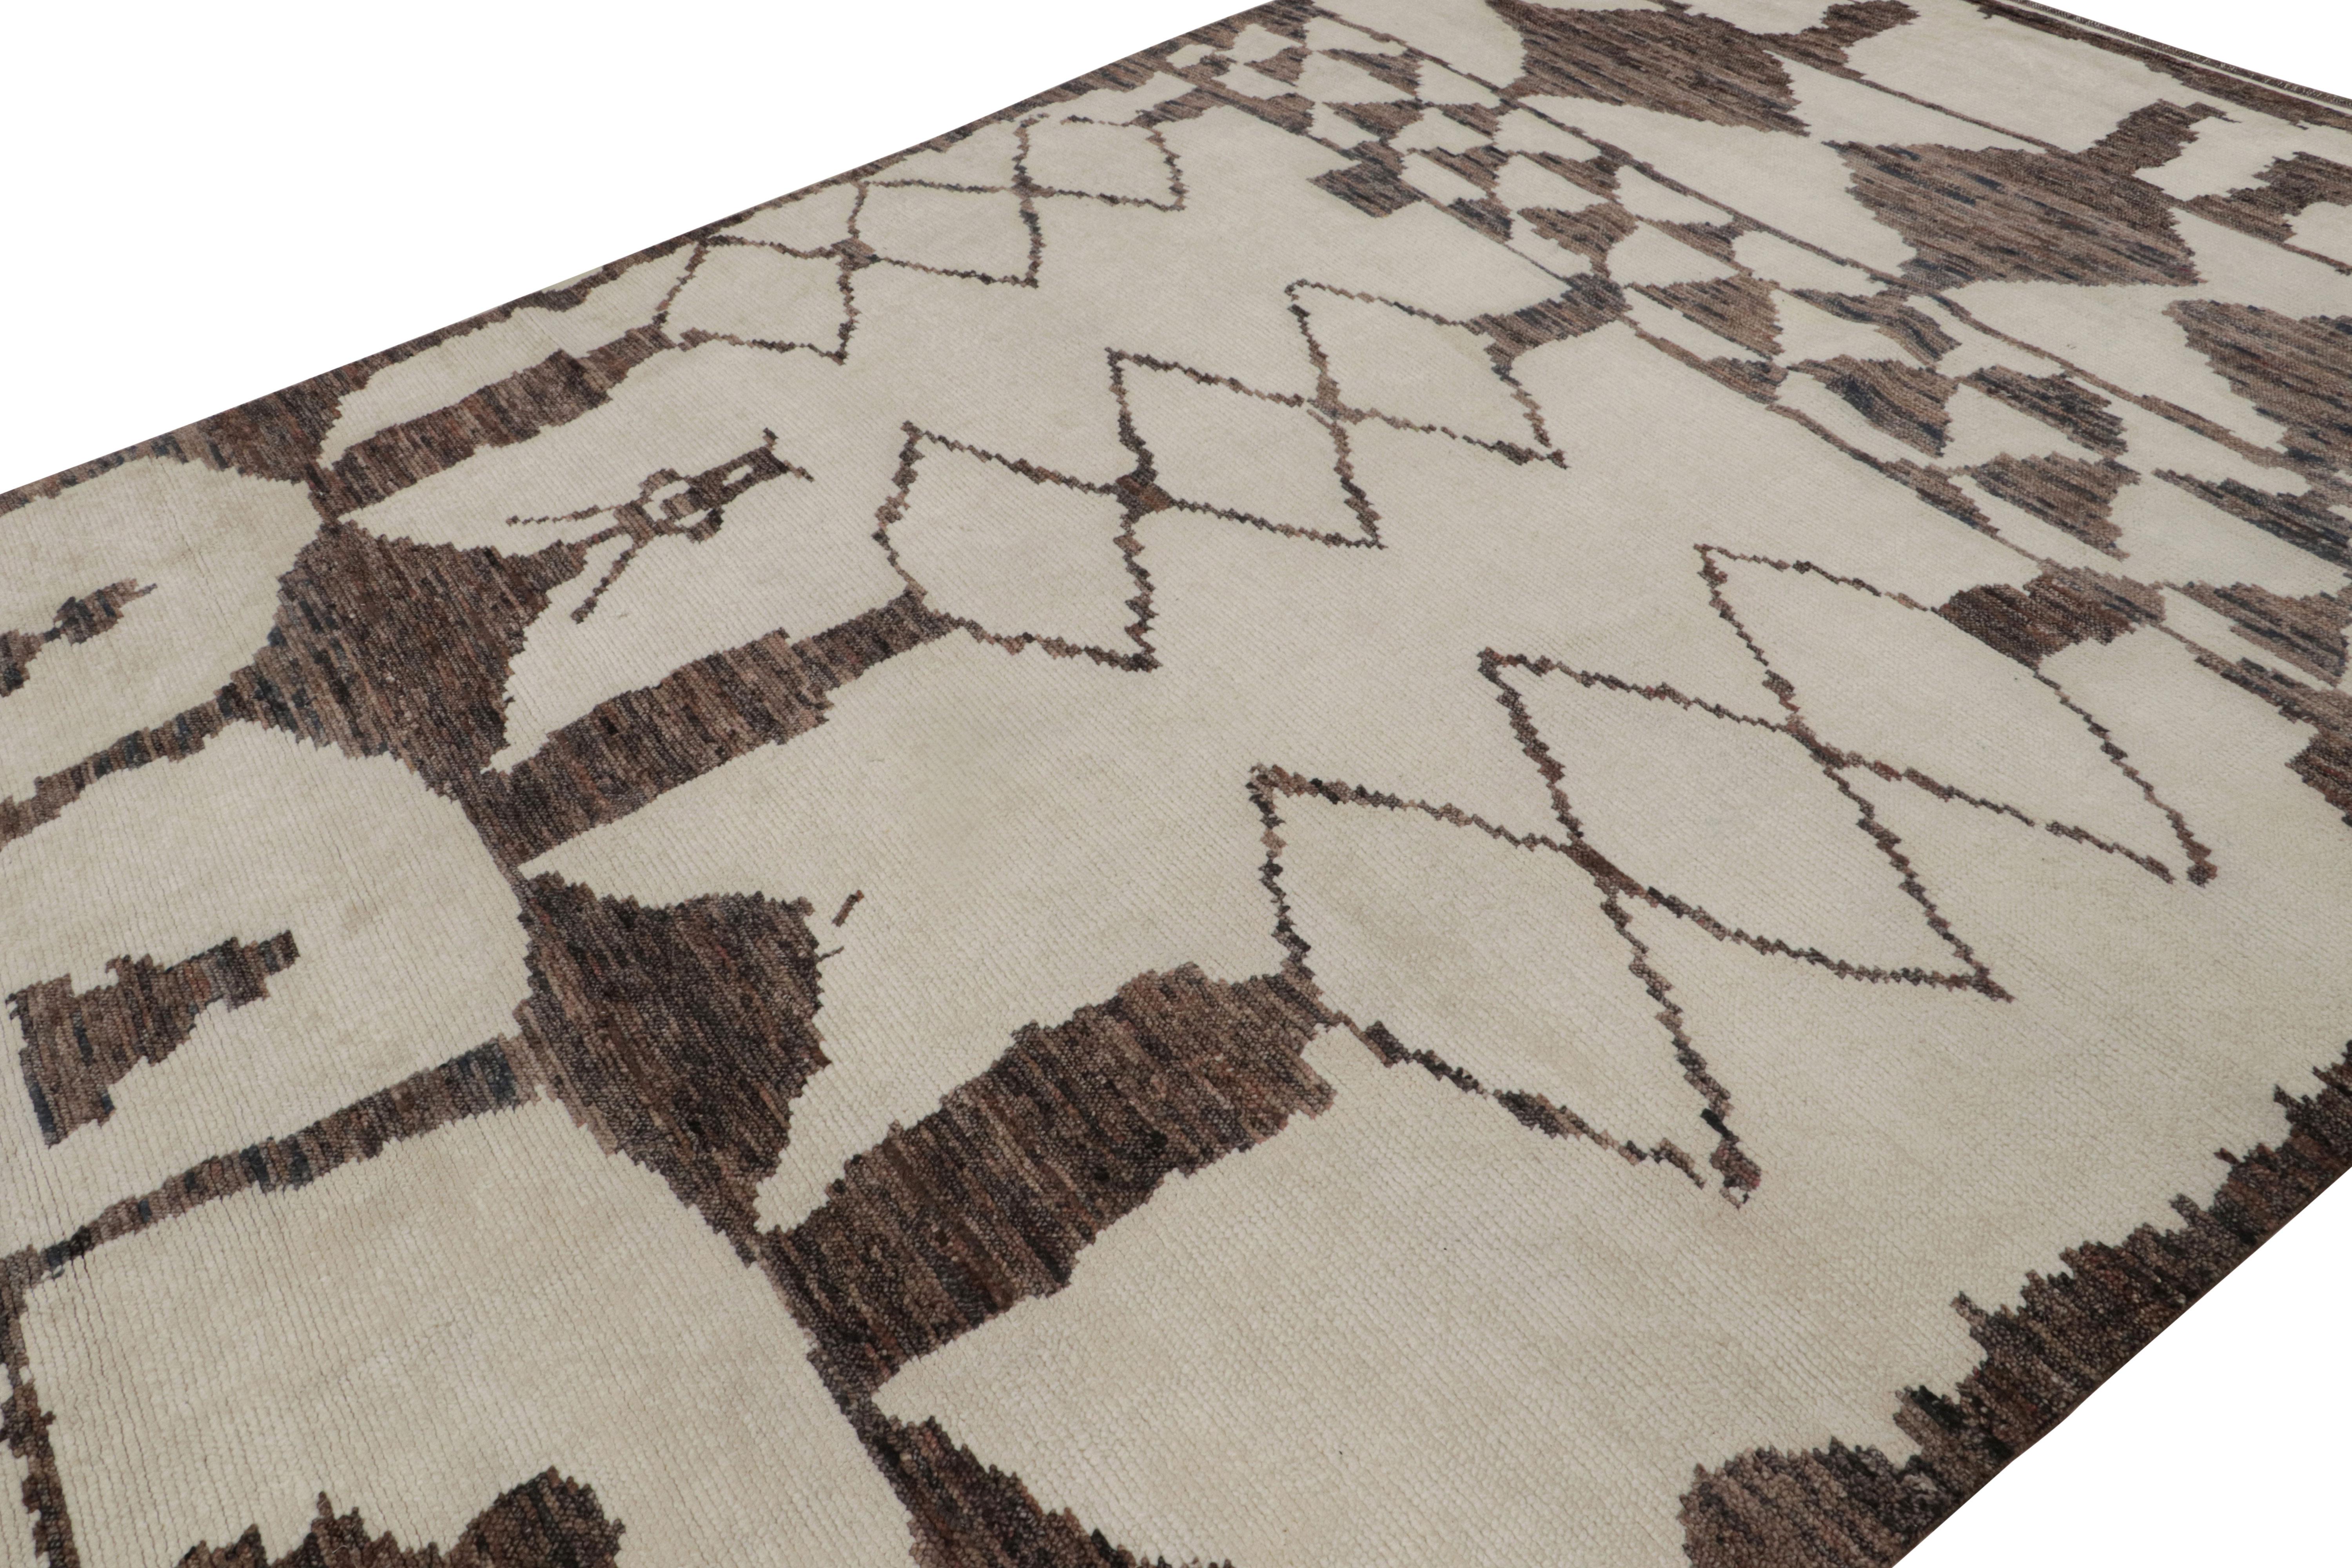 Hand-knotted in silk, this 9x13 contemporary contemporary rug in beige and brown features a design inspired by the primitivist Berber weavers—an exemplary work from Rug & Kilim’s contemporary take on Moroccan rugs.

On the Design: 

Connoisseurs may